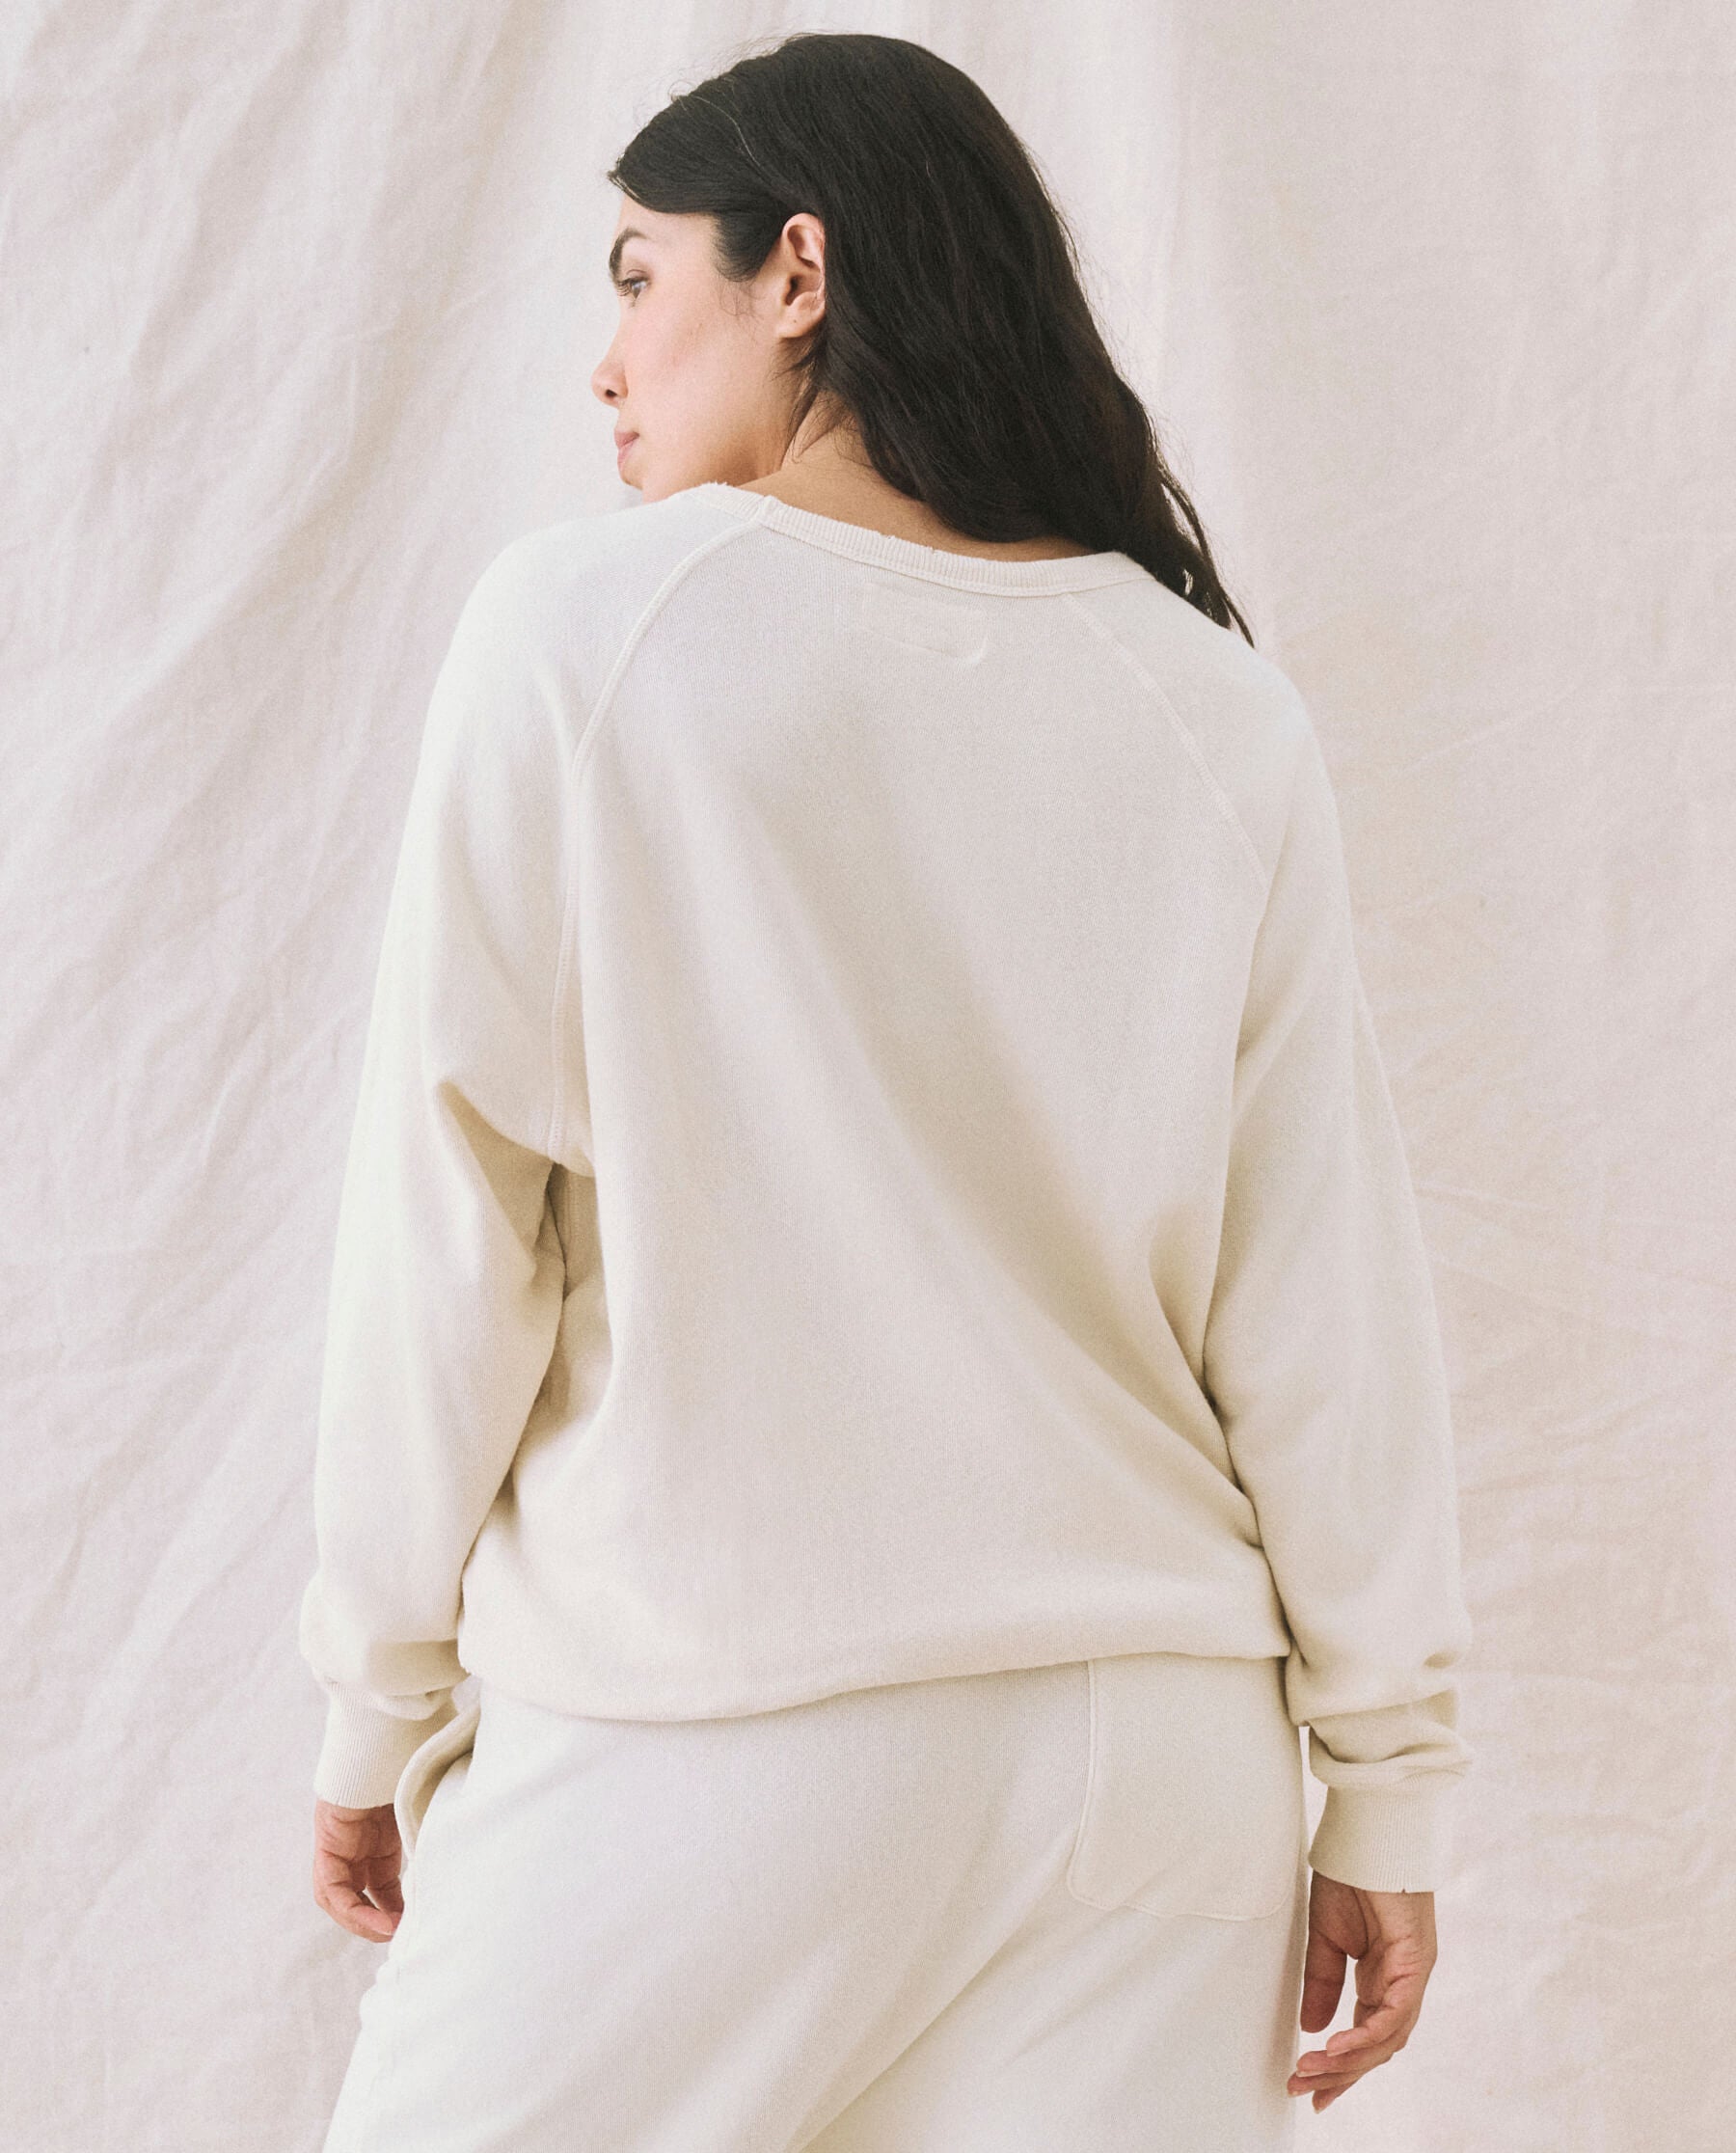 The College Sweatshirt. Solid -- Washed White SWEATSHIRTS THE GREAT. CORE KNITS